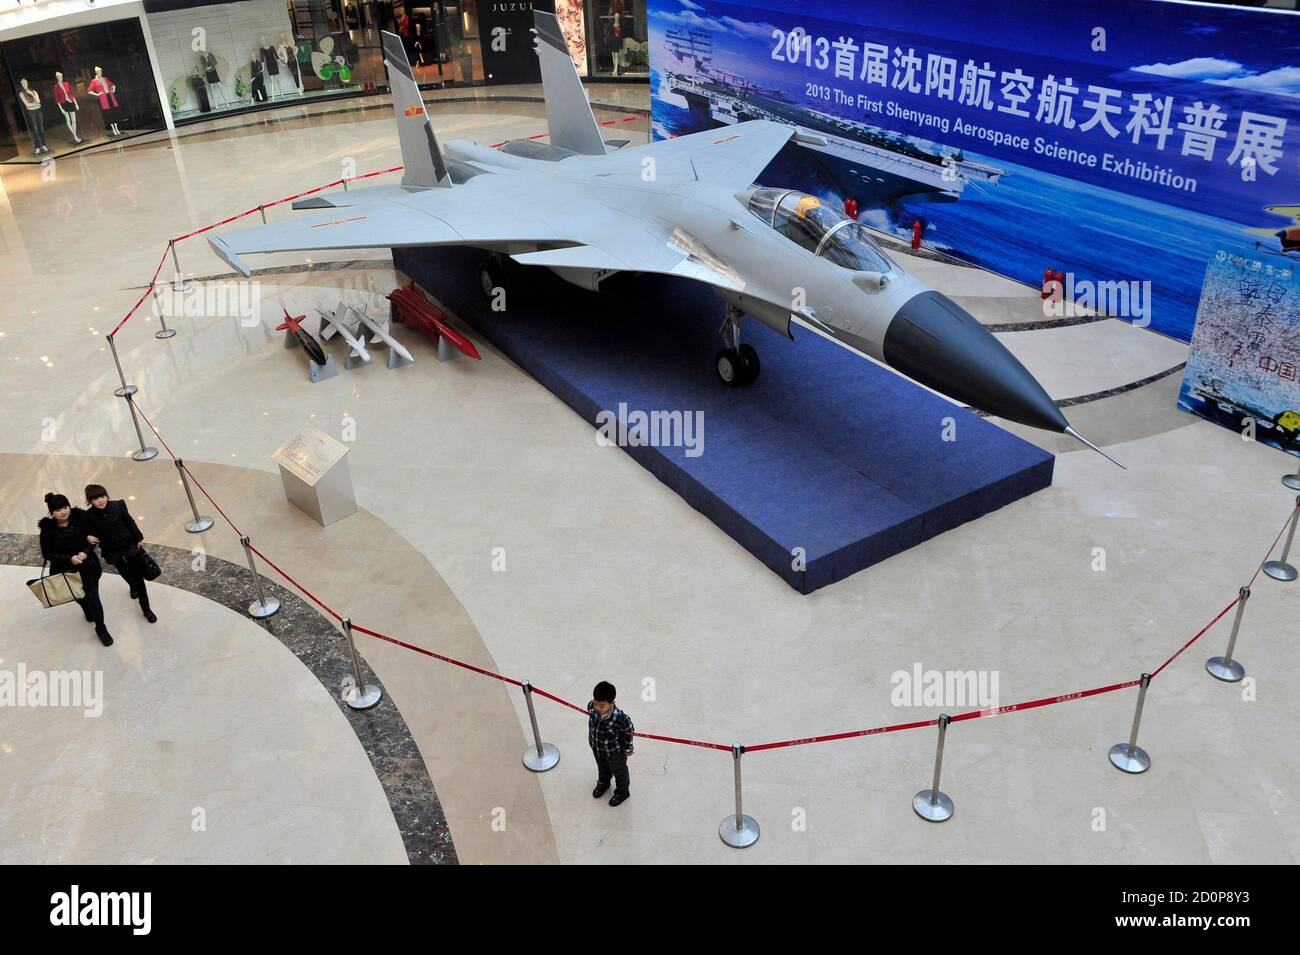 People walk past a model of J-15 fighter aircraft during an aerospace  science exhibition inside a shopping mall in Shenyang, February 26, 2013.  The exhibition runs from February 6 to February 28.